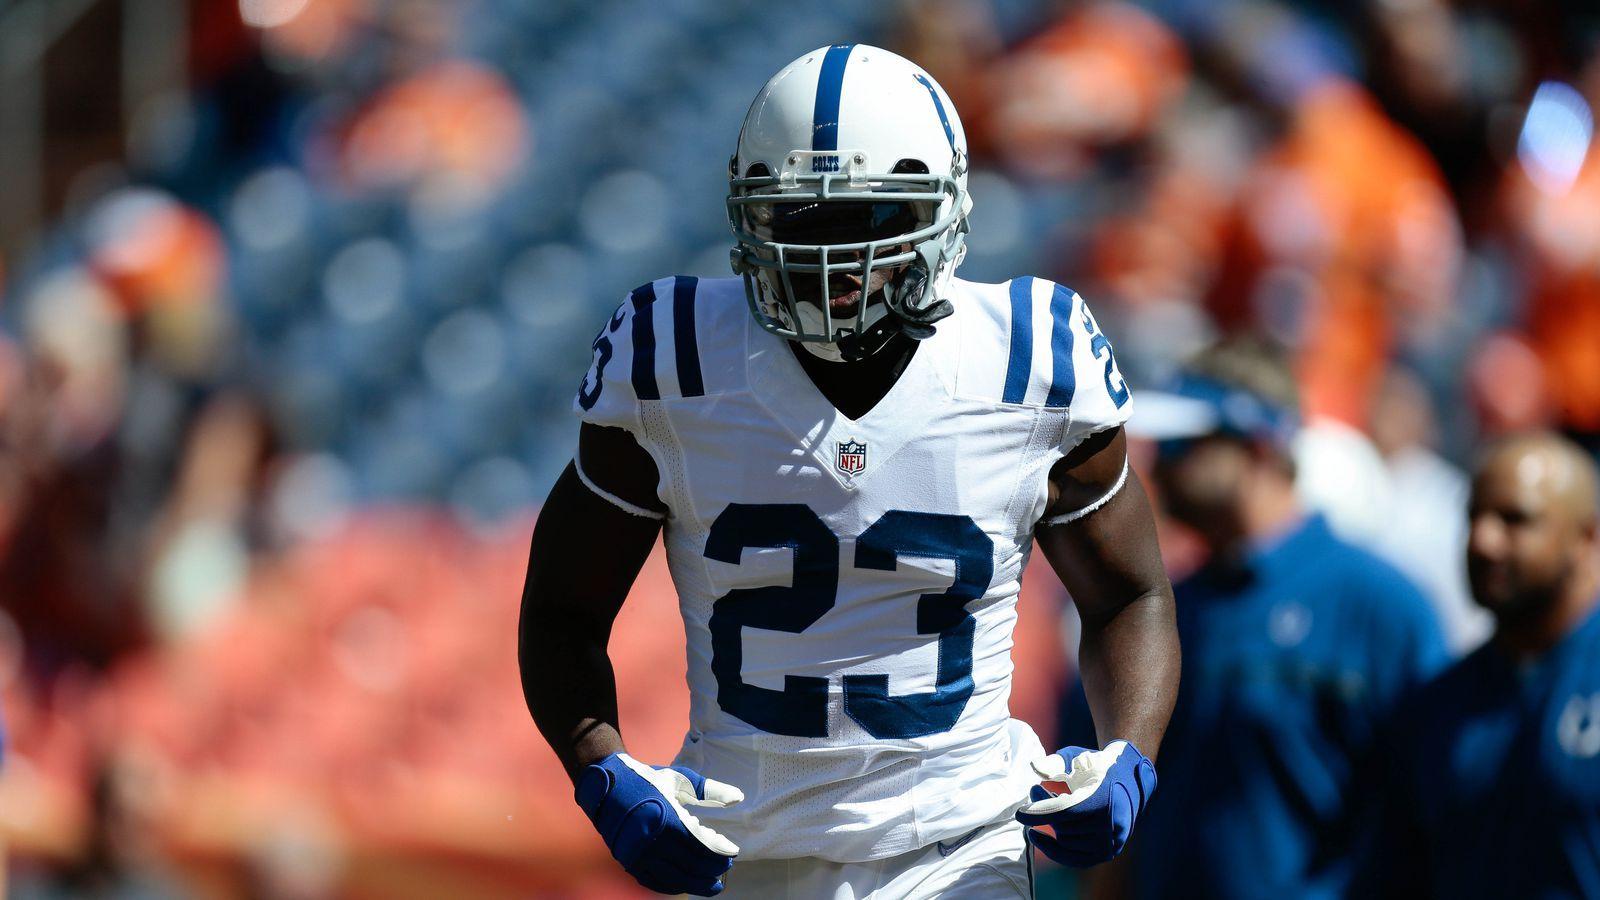 Frank Gore back working with the Colts this week in OTAs